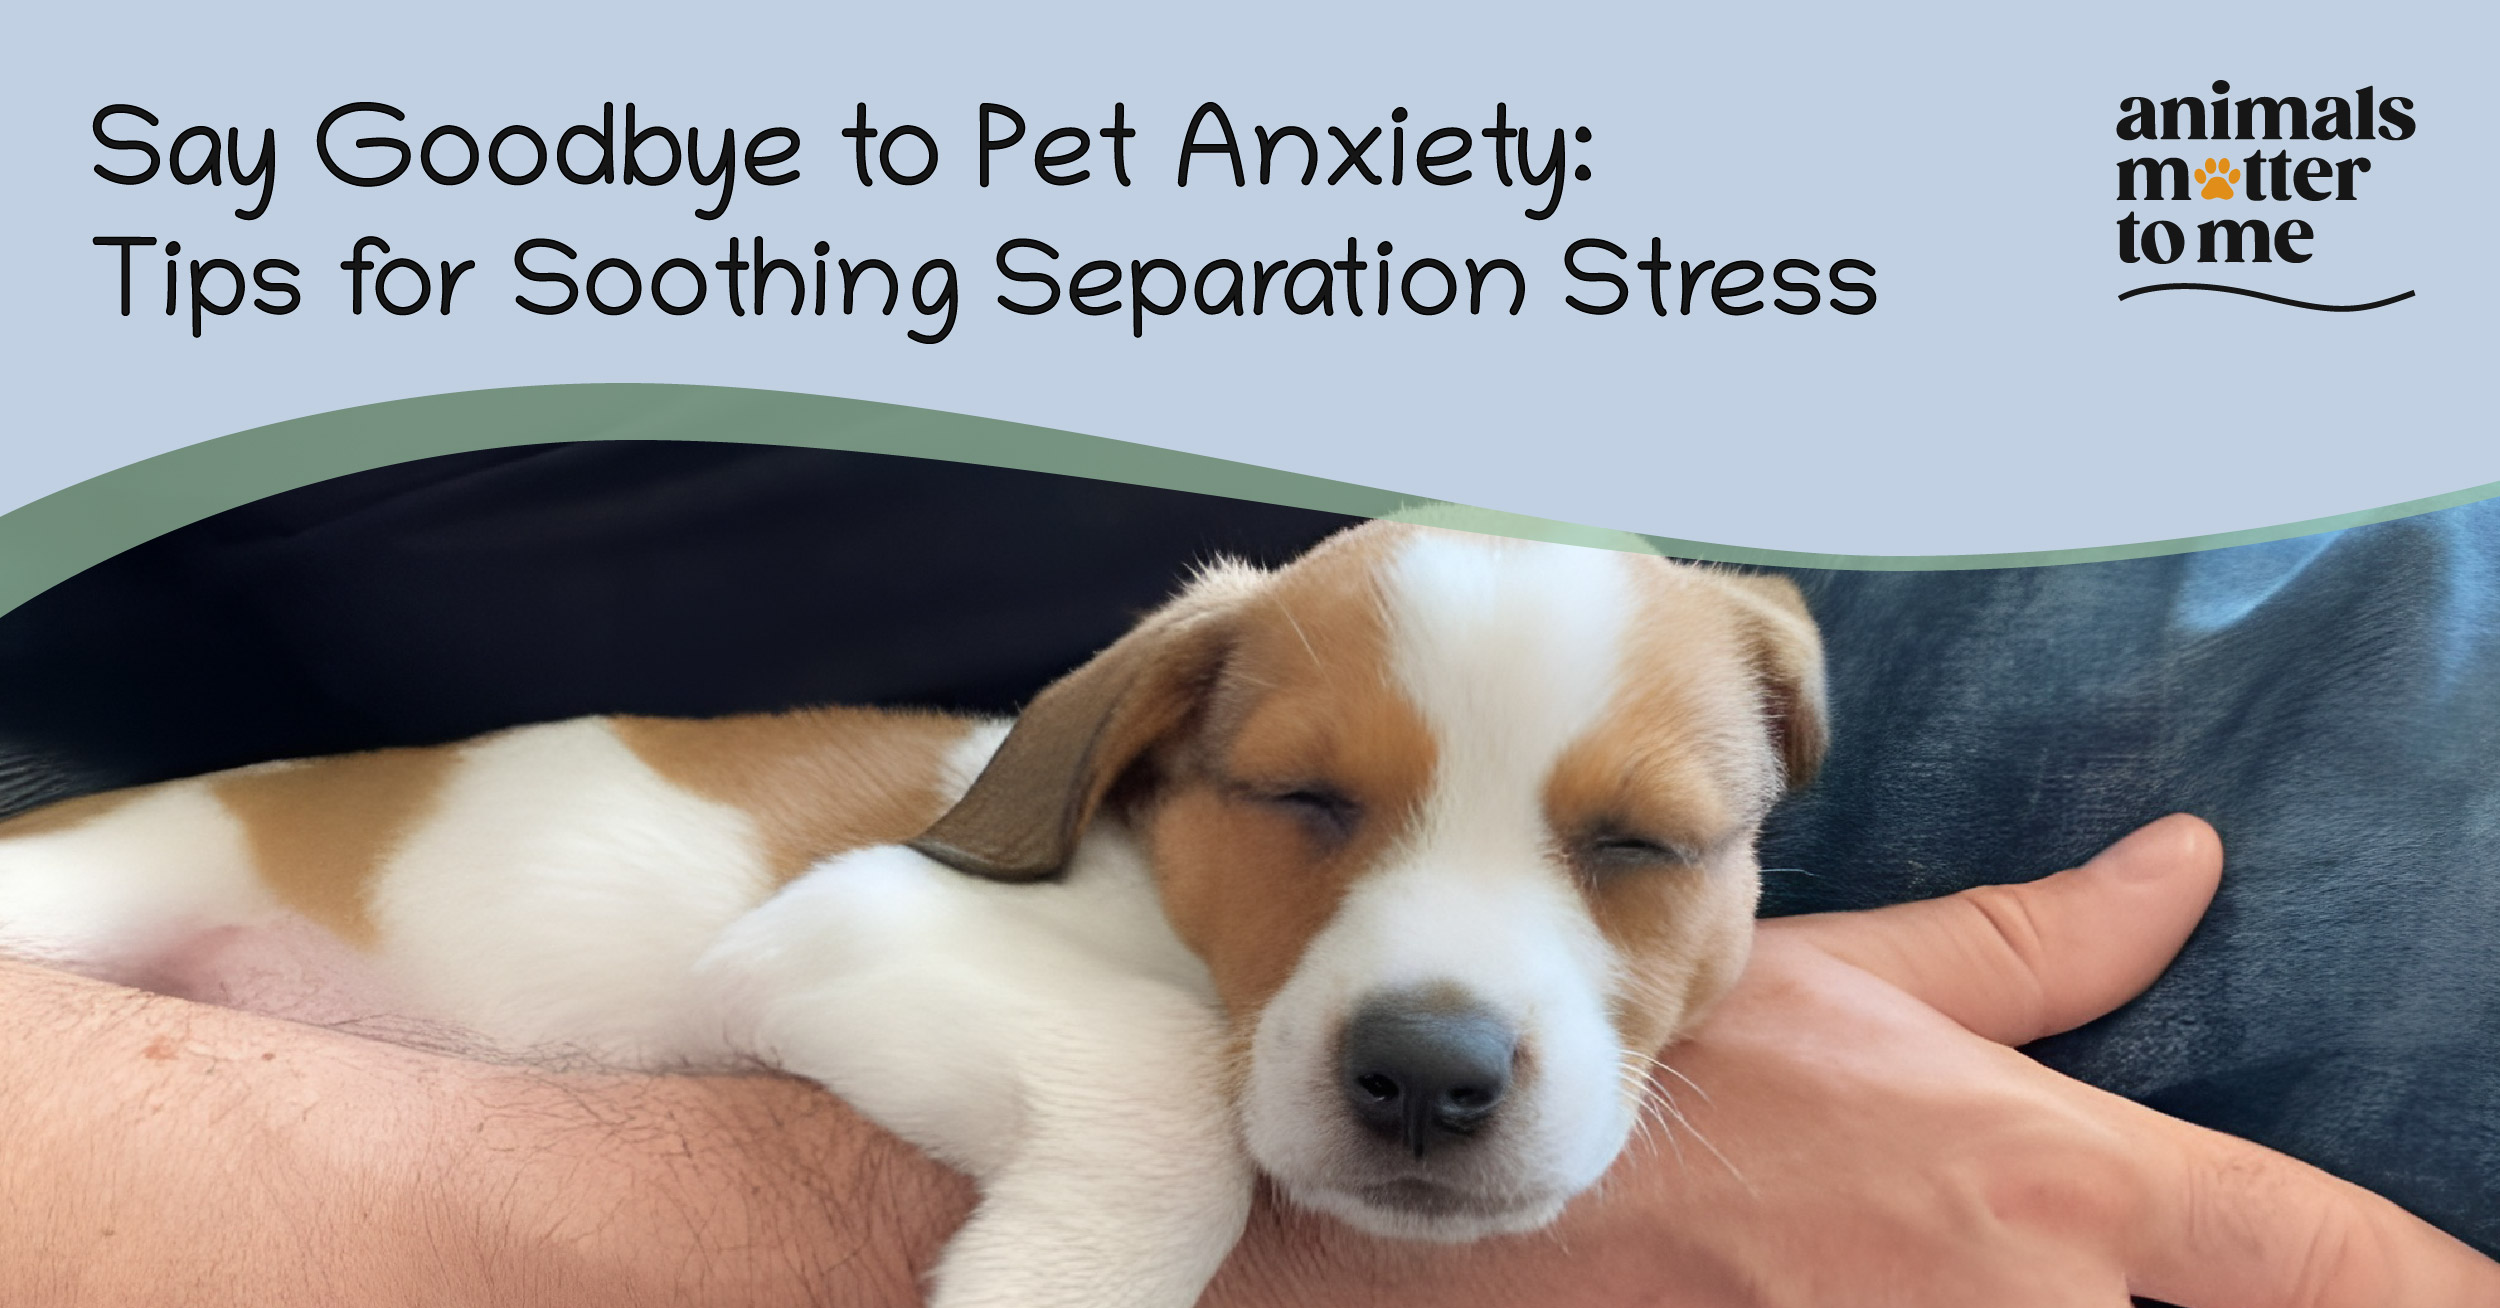 Say Goodbye to Pet Anxiety: Tips for Soothing Separation Stress